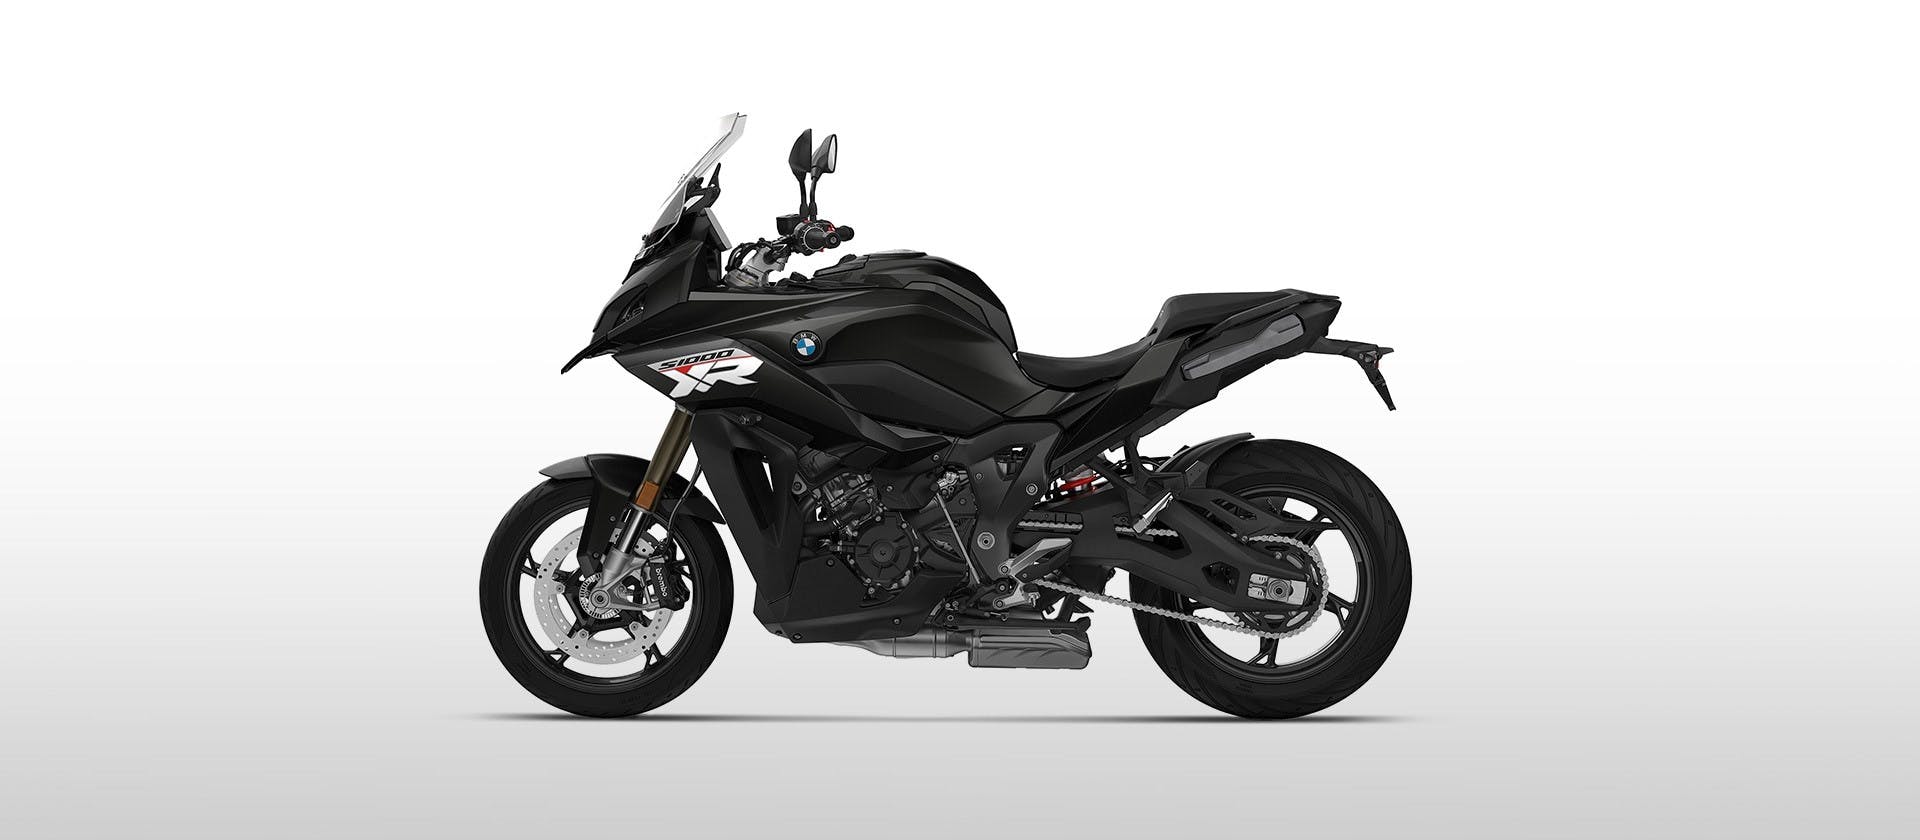 BMW S 1000 XR in black colour